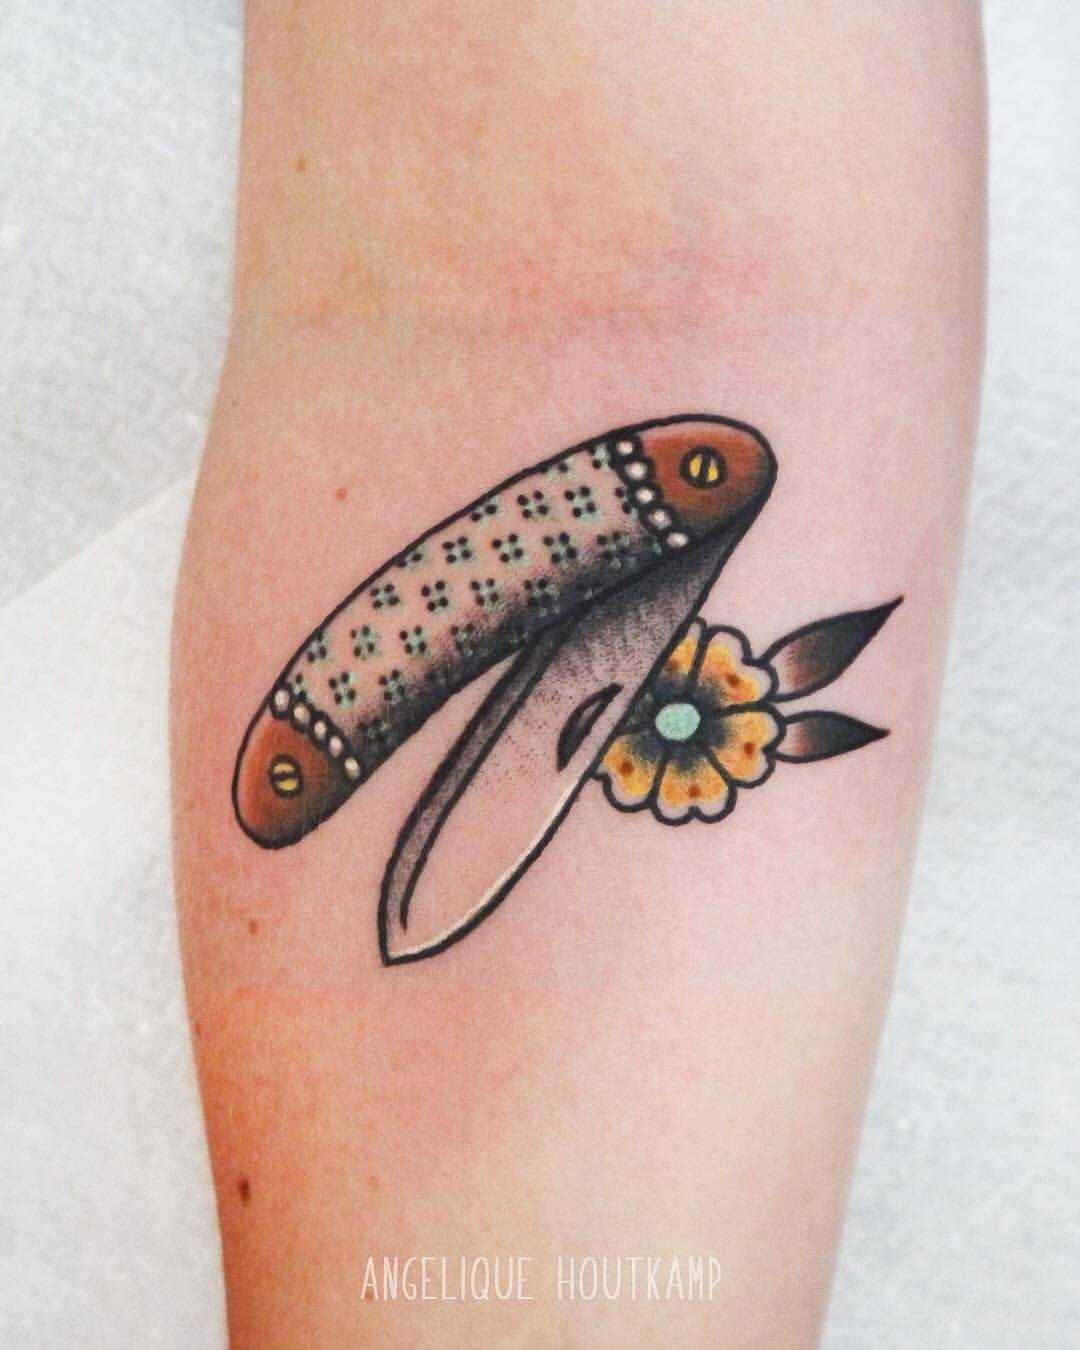 Pocket knife tattoo by by Angelique Houtkamp